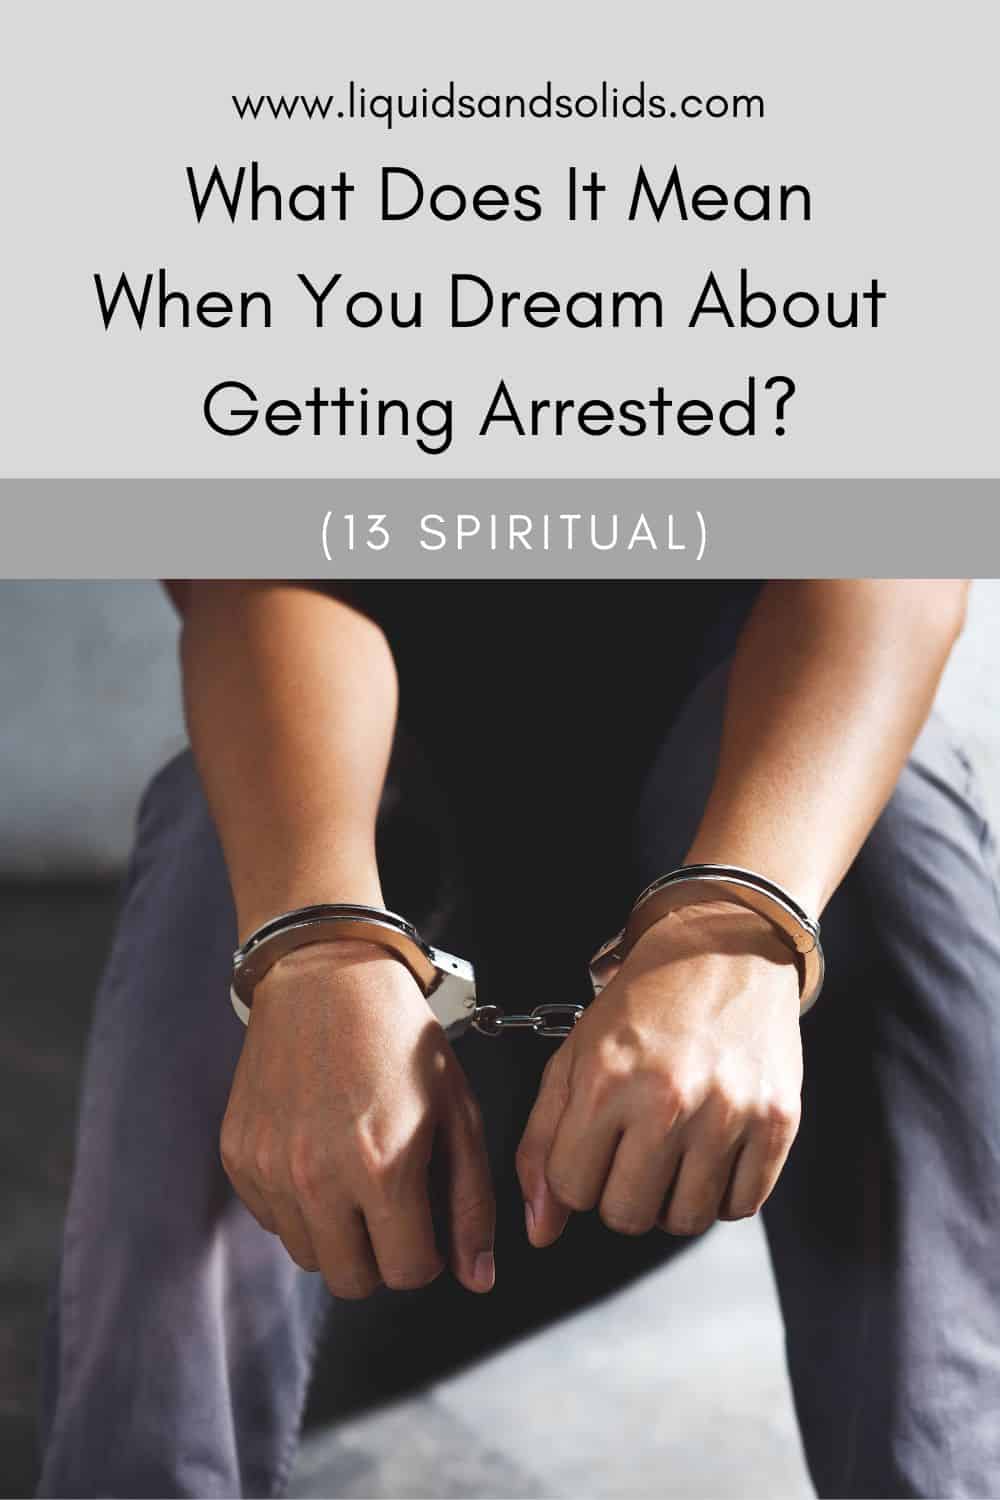 dream about getting arrested meaning